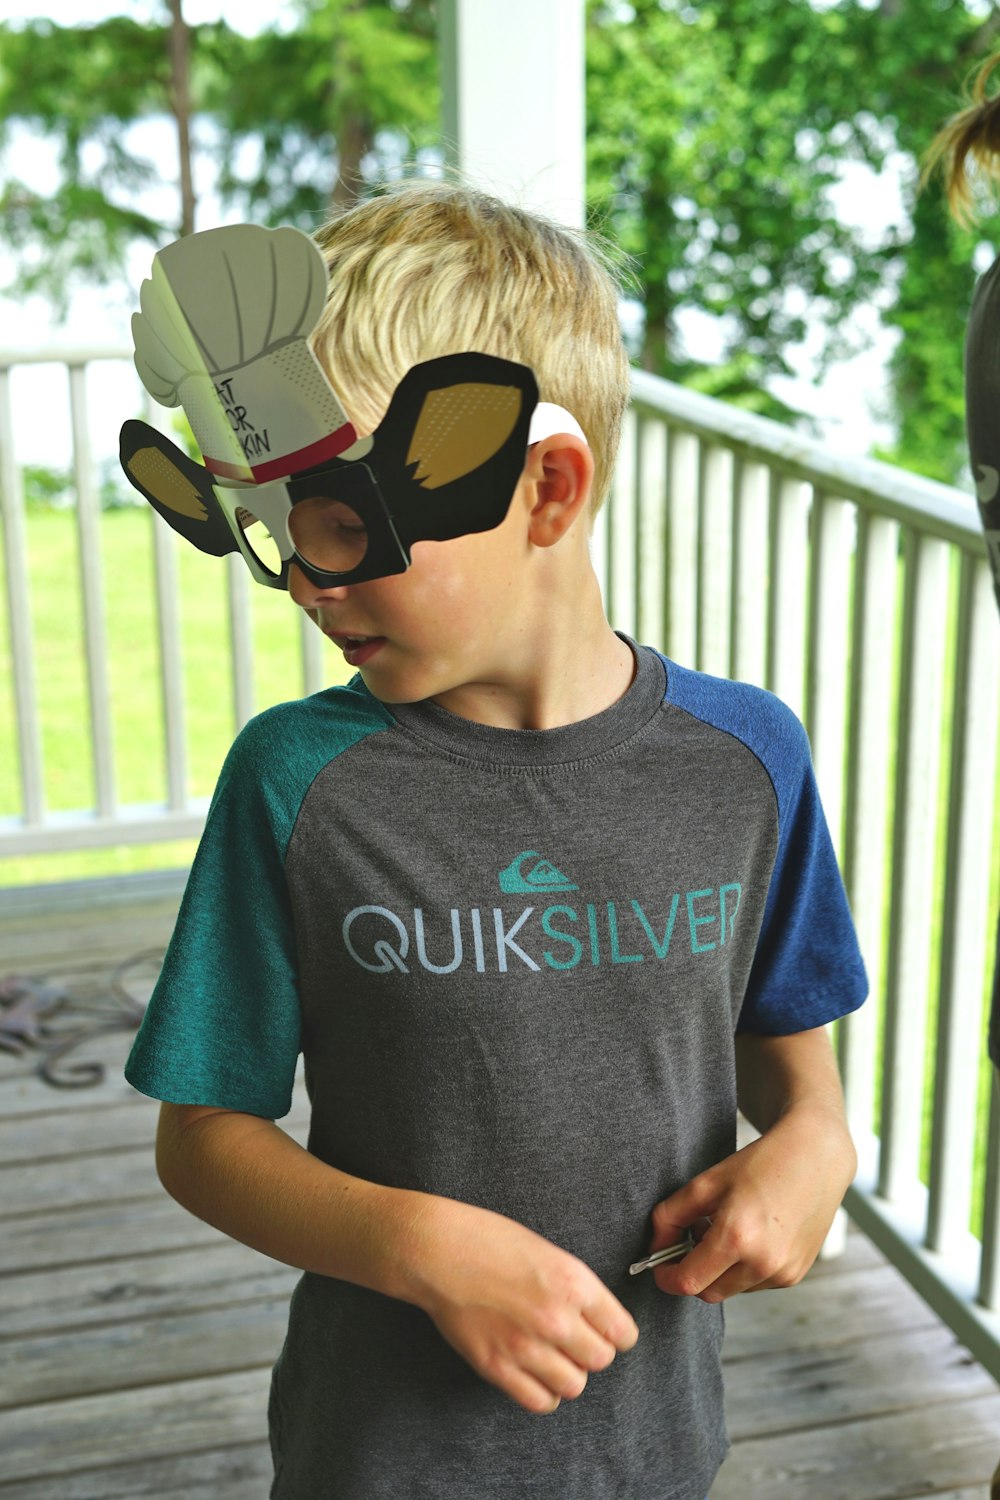 a young boy wearing a pair of goggles